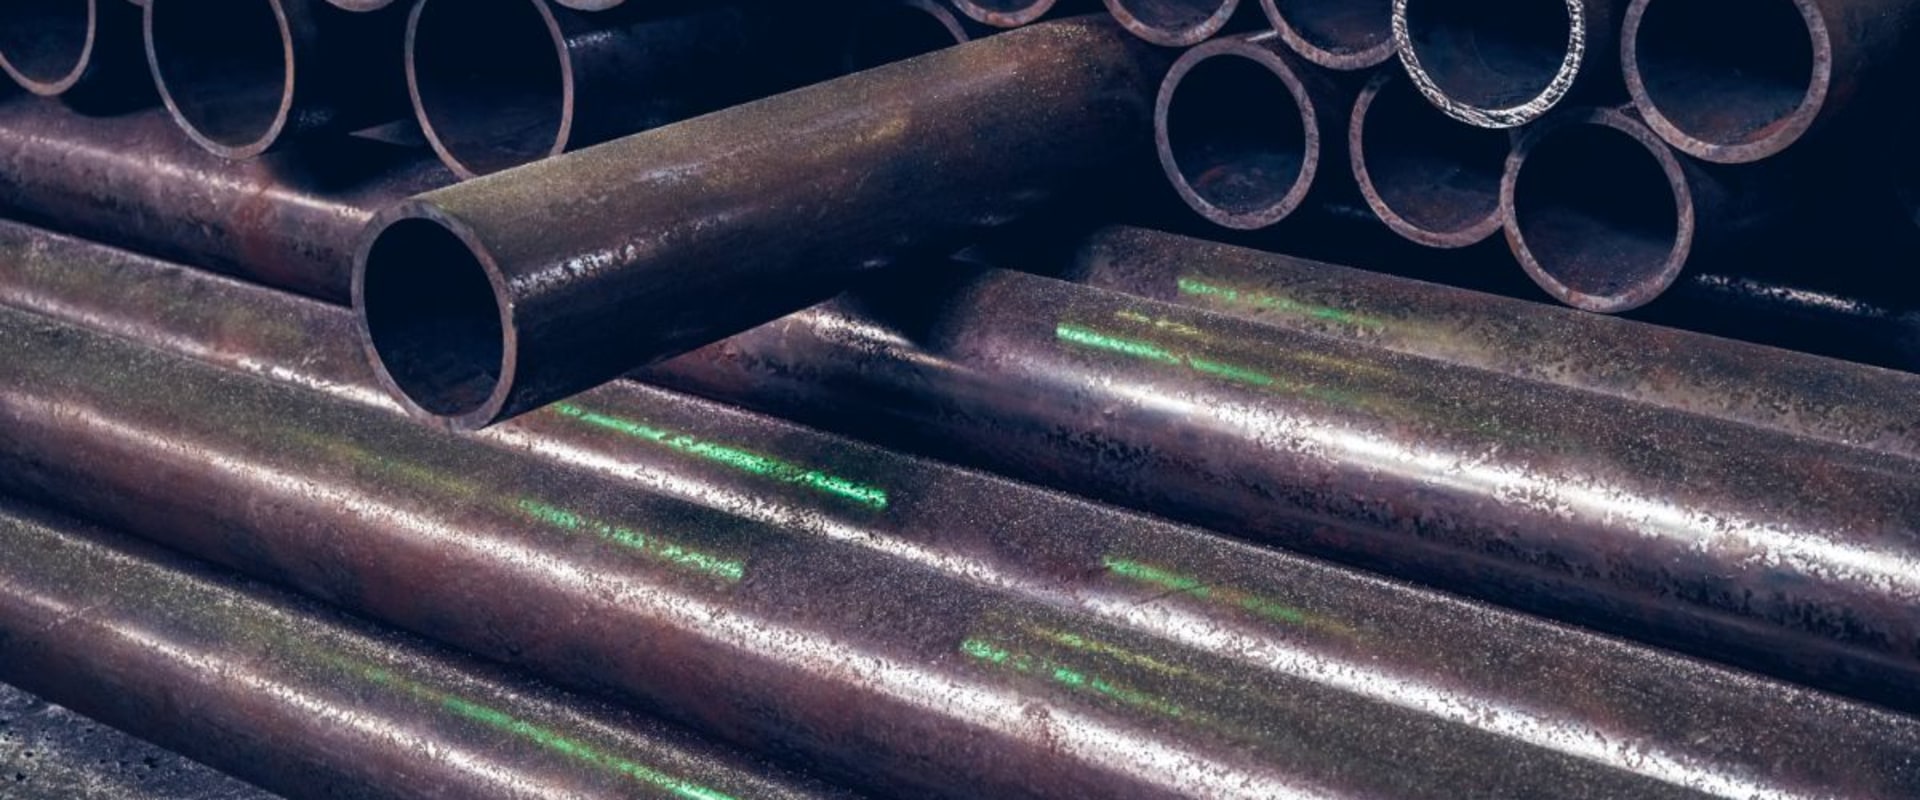 Steel: Uses, Benefits and Applications